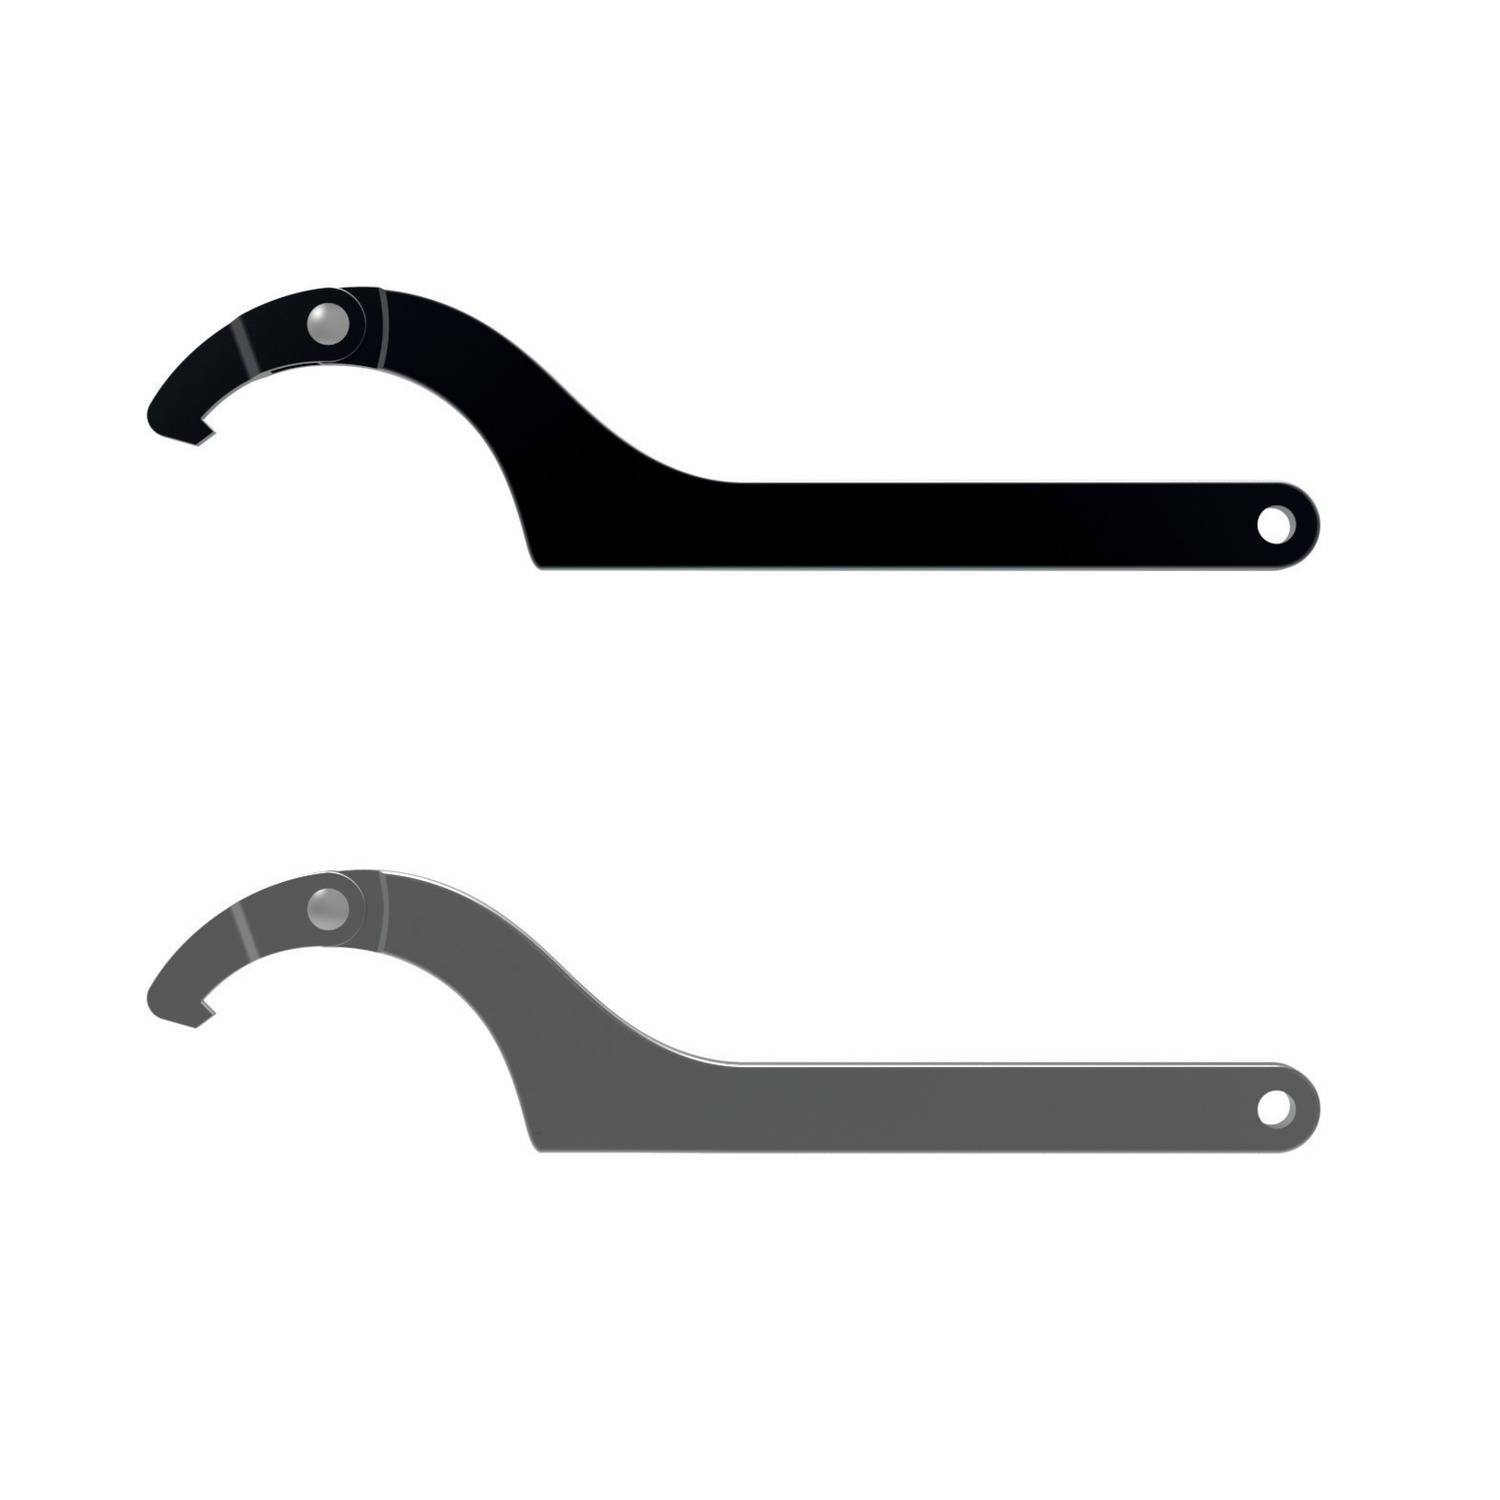 Hook Spanners - Hook Hook spanners made from steel (blackened) or stainless steel. They have rounded edges for better handling. The thickness of the spanner depends on the DIN size.